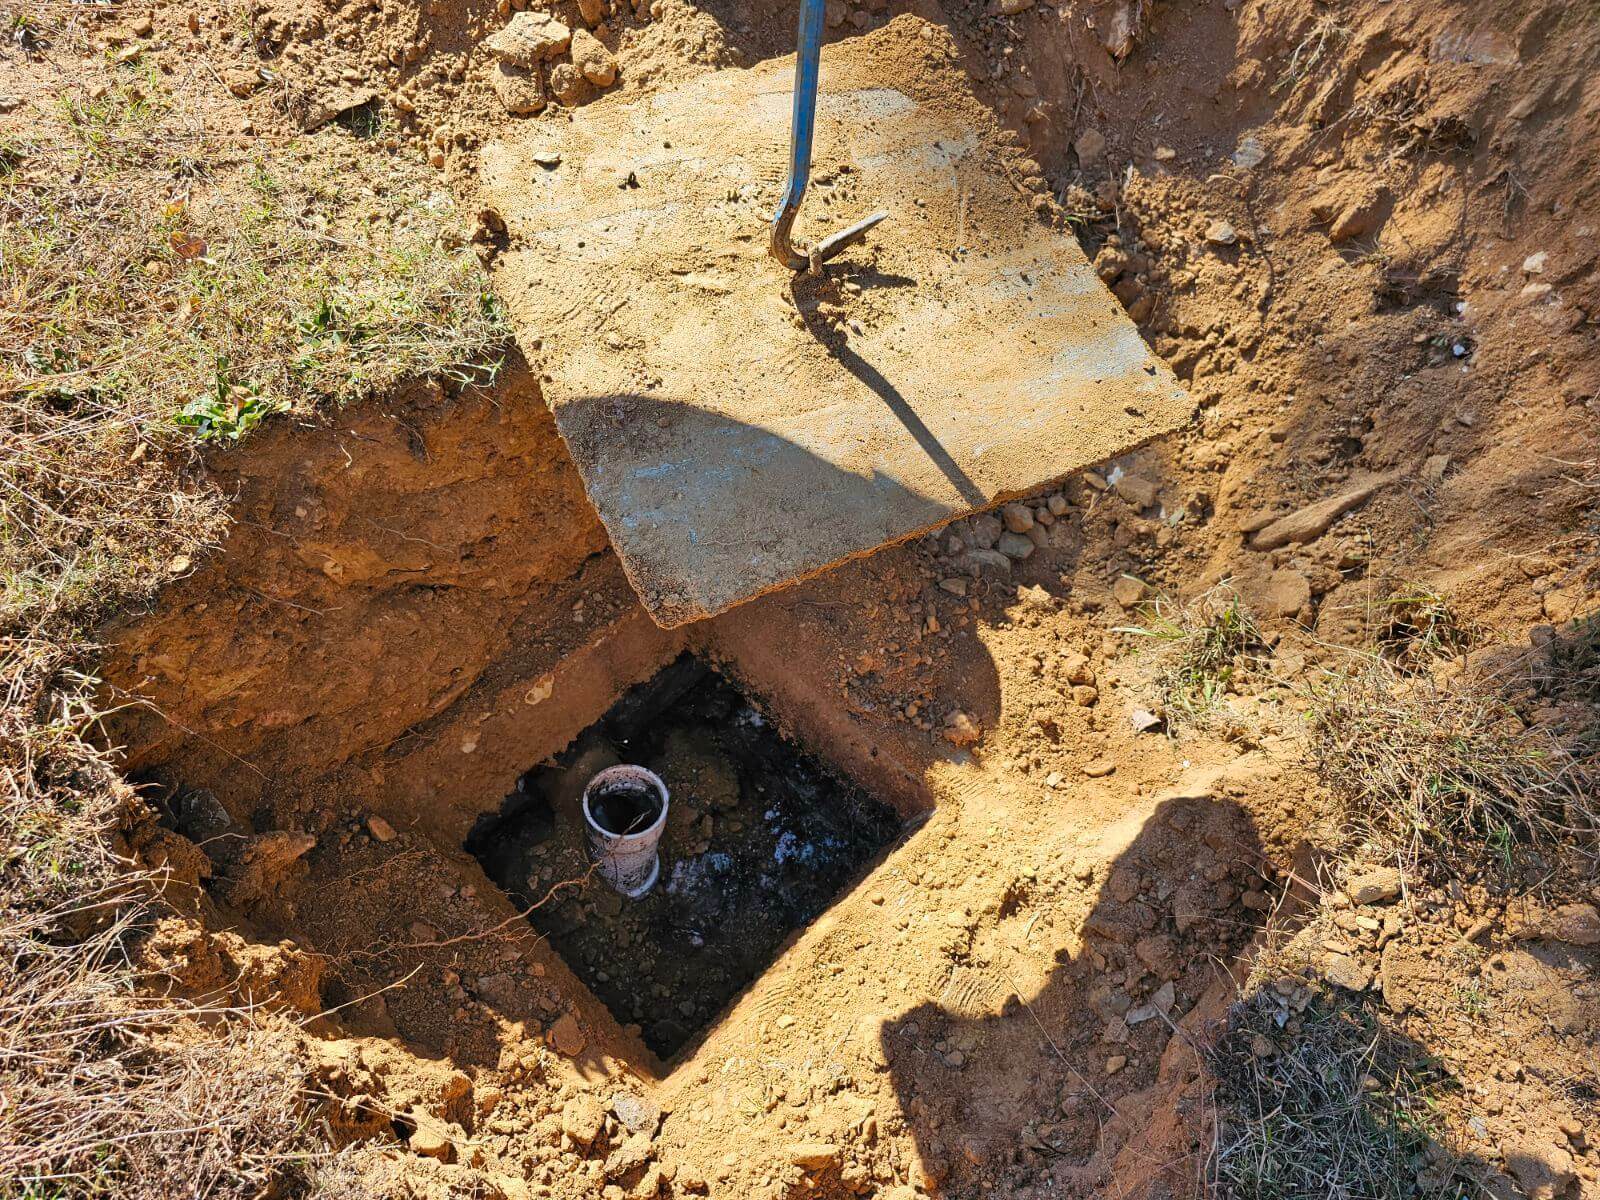 A man is digging a hole in the ground.